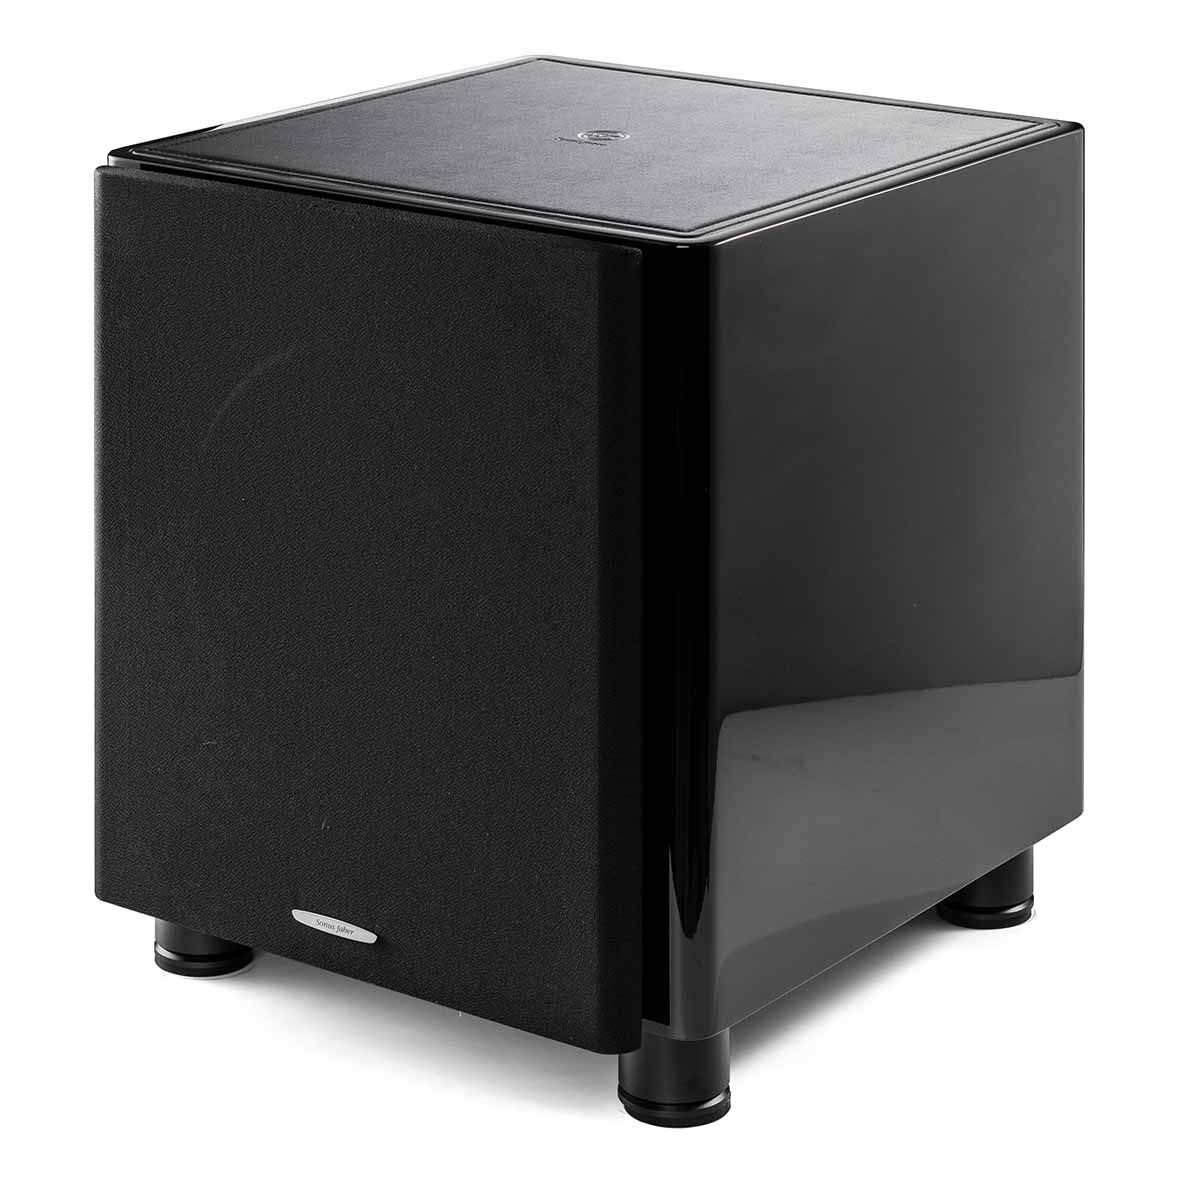 Sonus Faber Gravis II 10" Powered Subwoofer black angled front view with grille